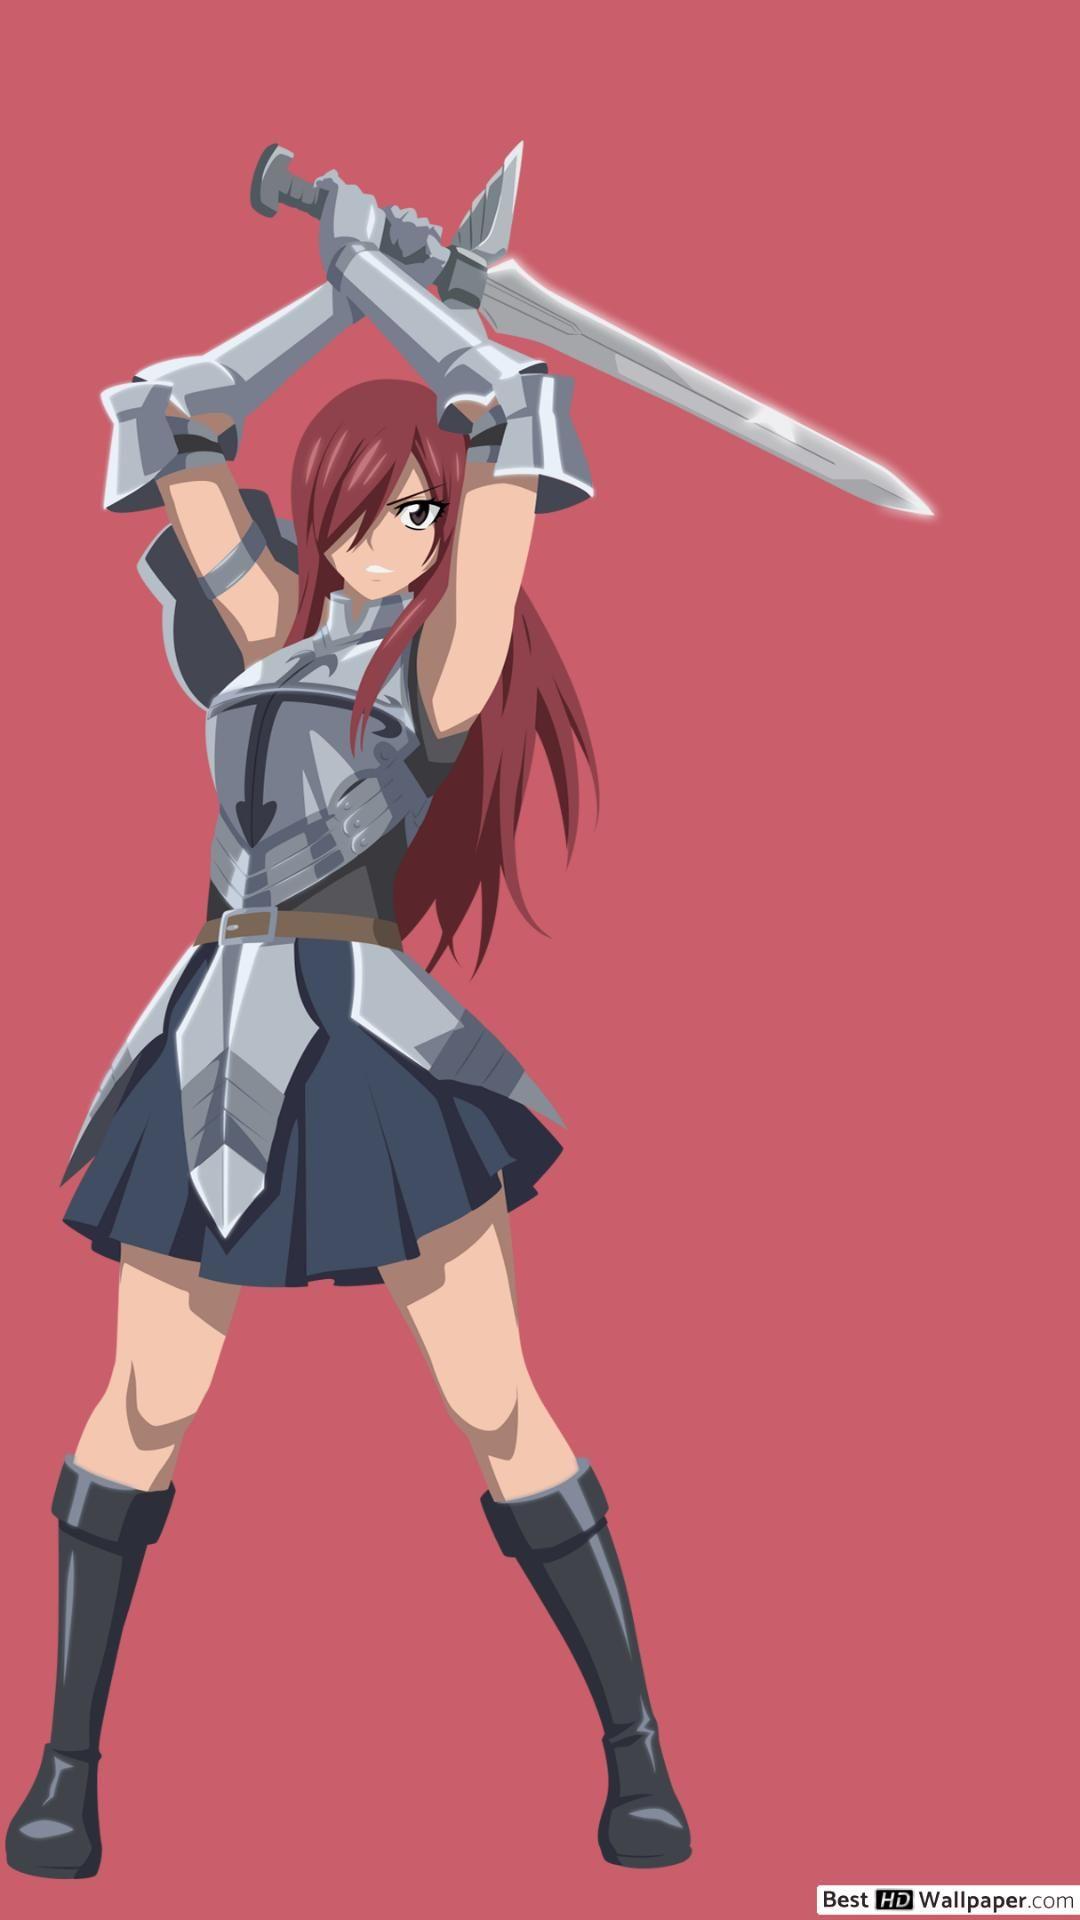 1080 x 1920 · jpeg - Erza Scarlet iPhone Wallpapers - Wallpaper Cave